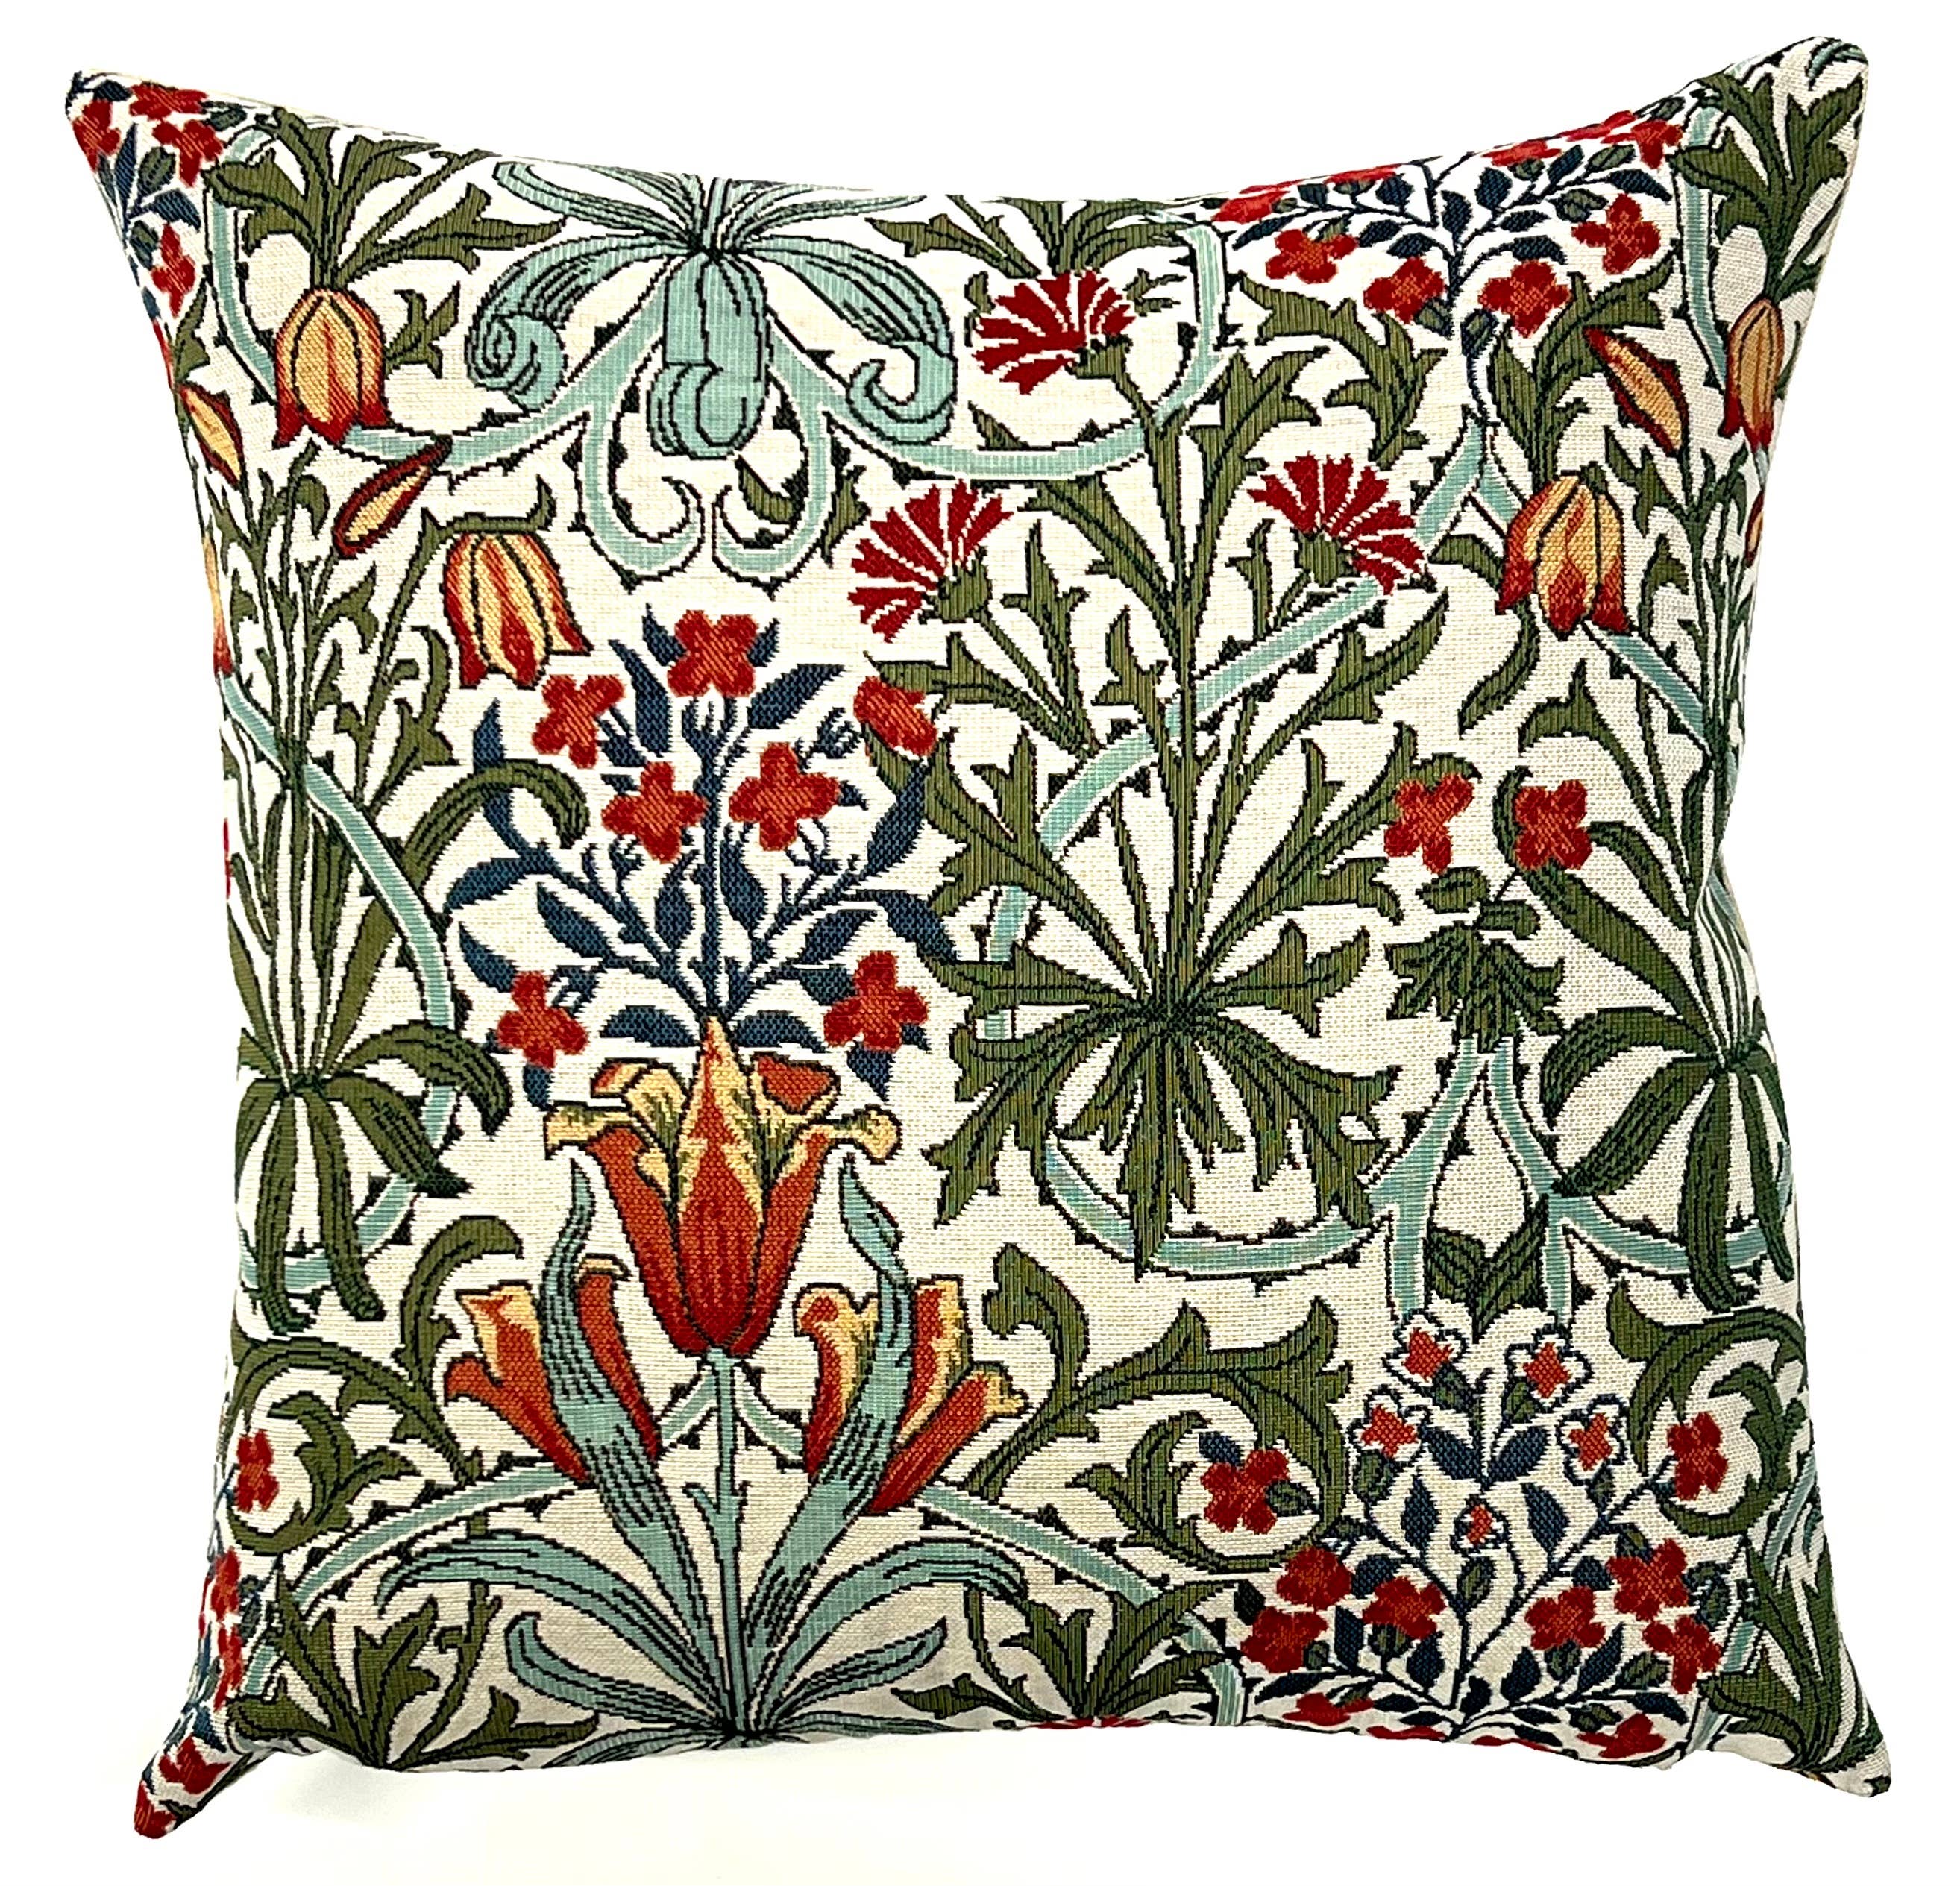 Floral Pillow - William Morris style